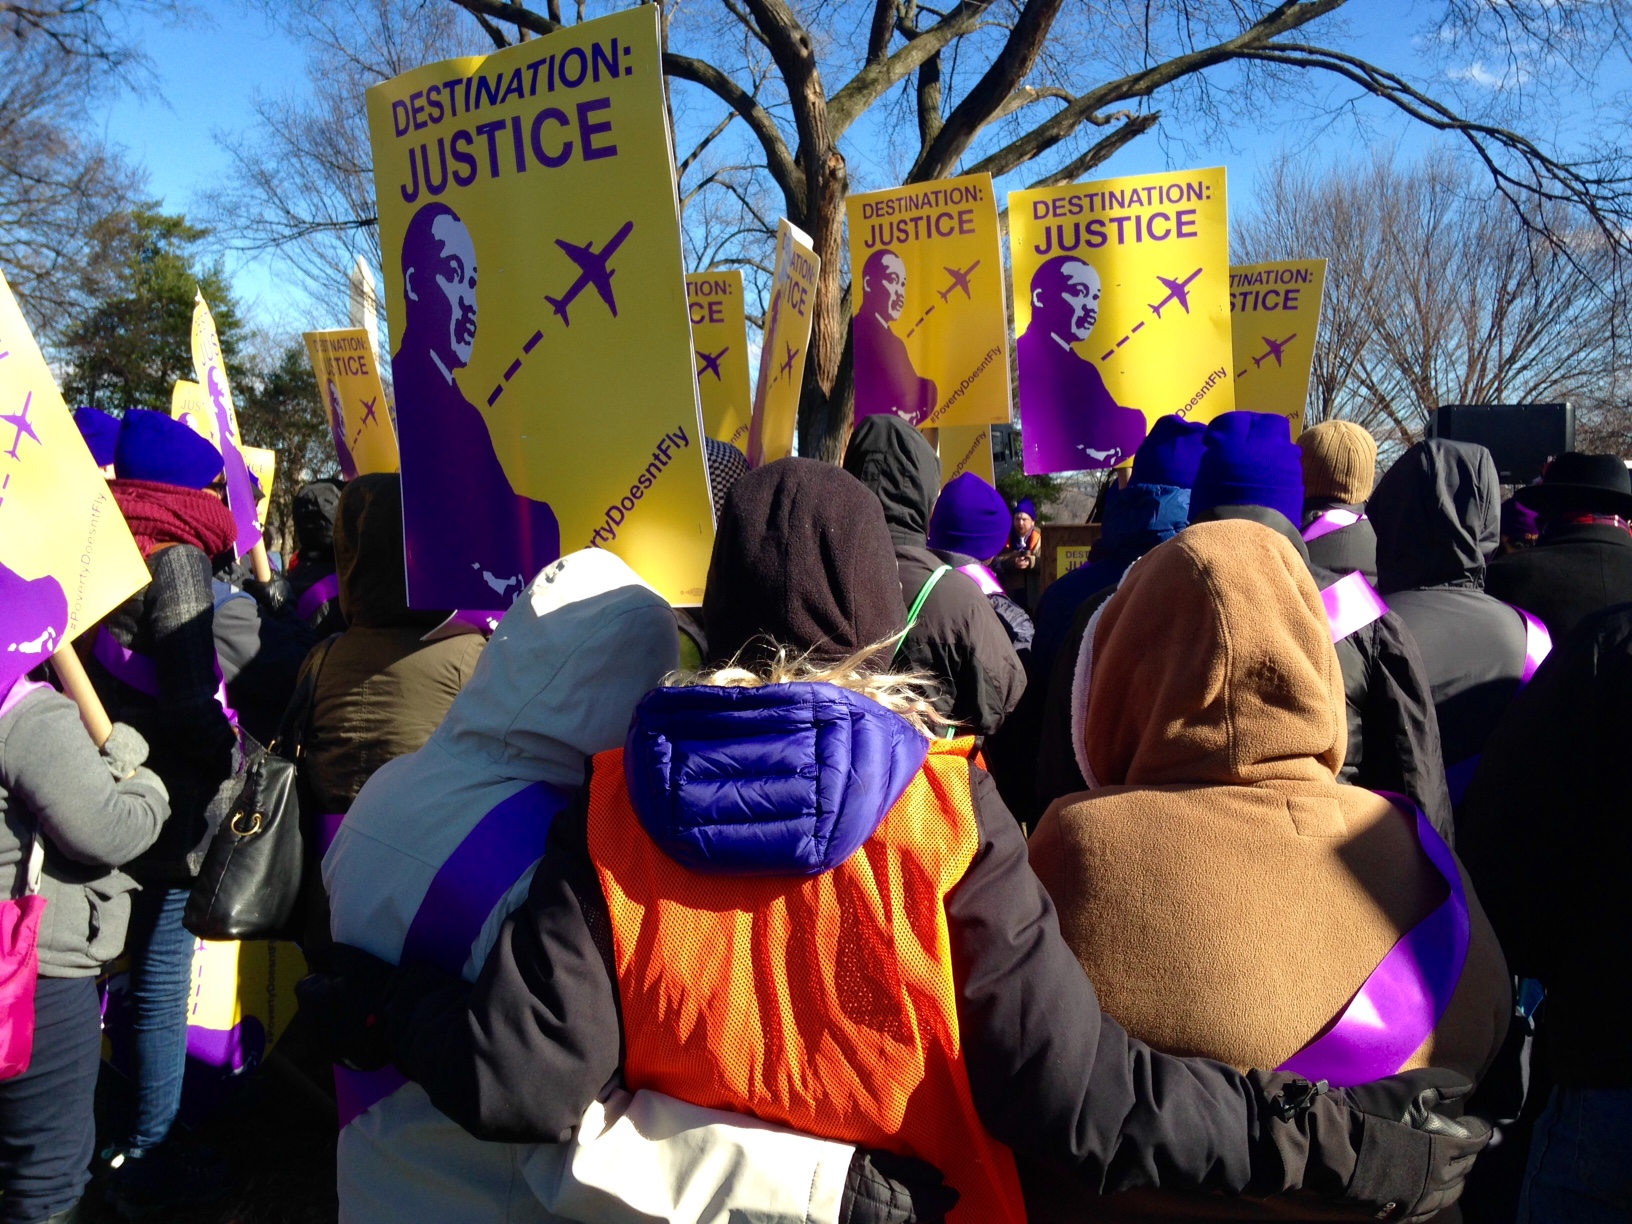 Workers with the BJ32 SEIU who handle bags, clean the airplanes and provide wheelchair service at Reagan National Airport rally for a living wage on January 18, 2016. (WTOP/Megan Cloherty)